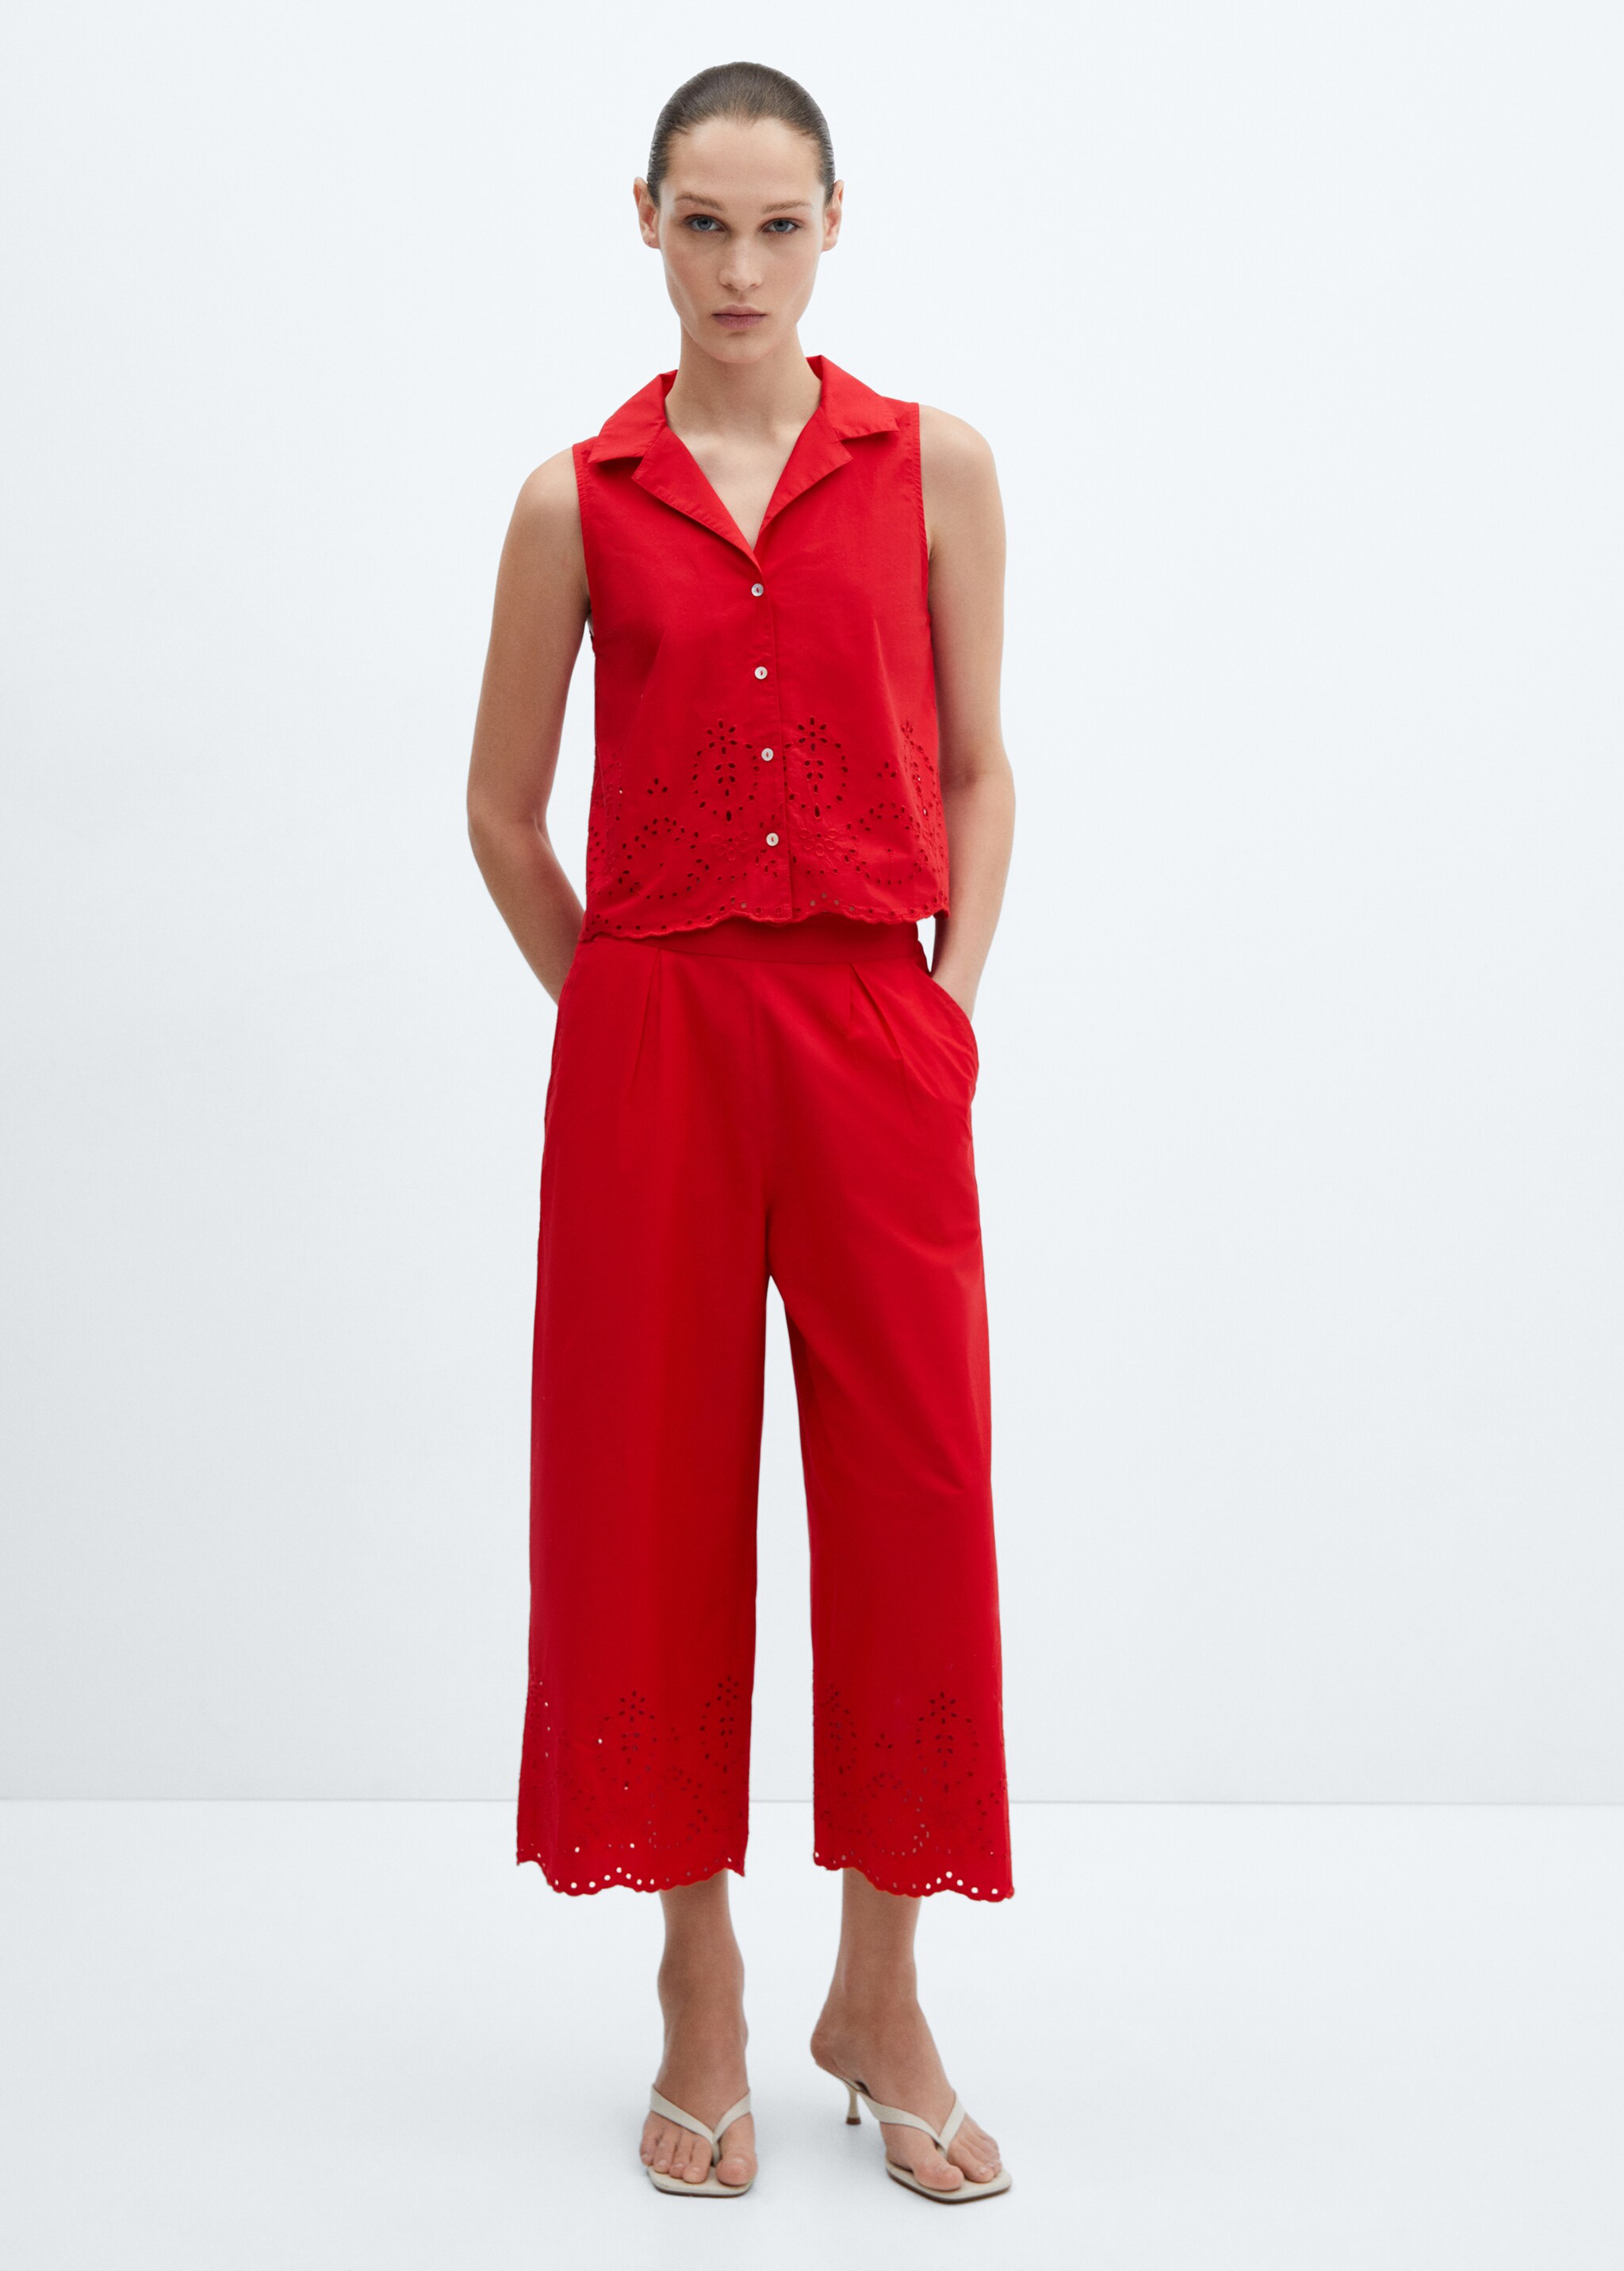 Embroidered culotte pants - General plane